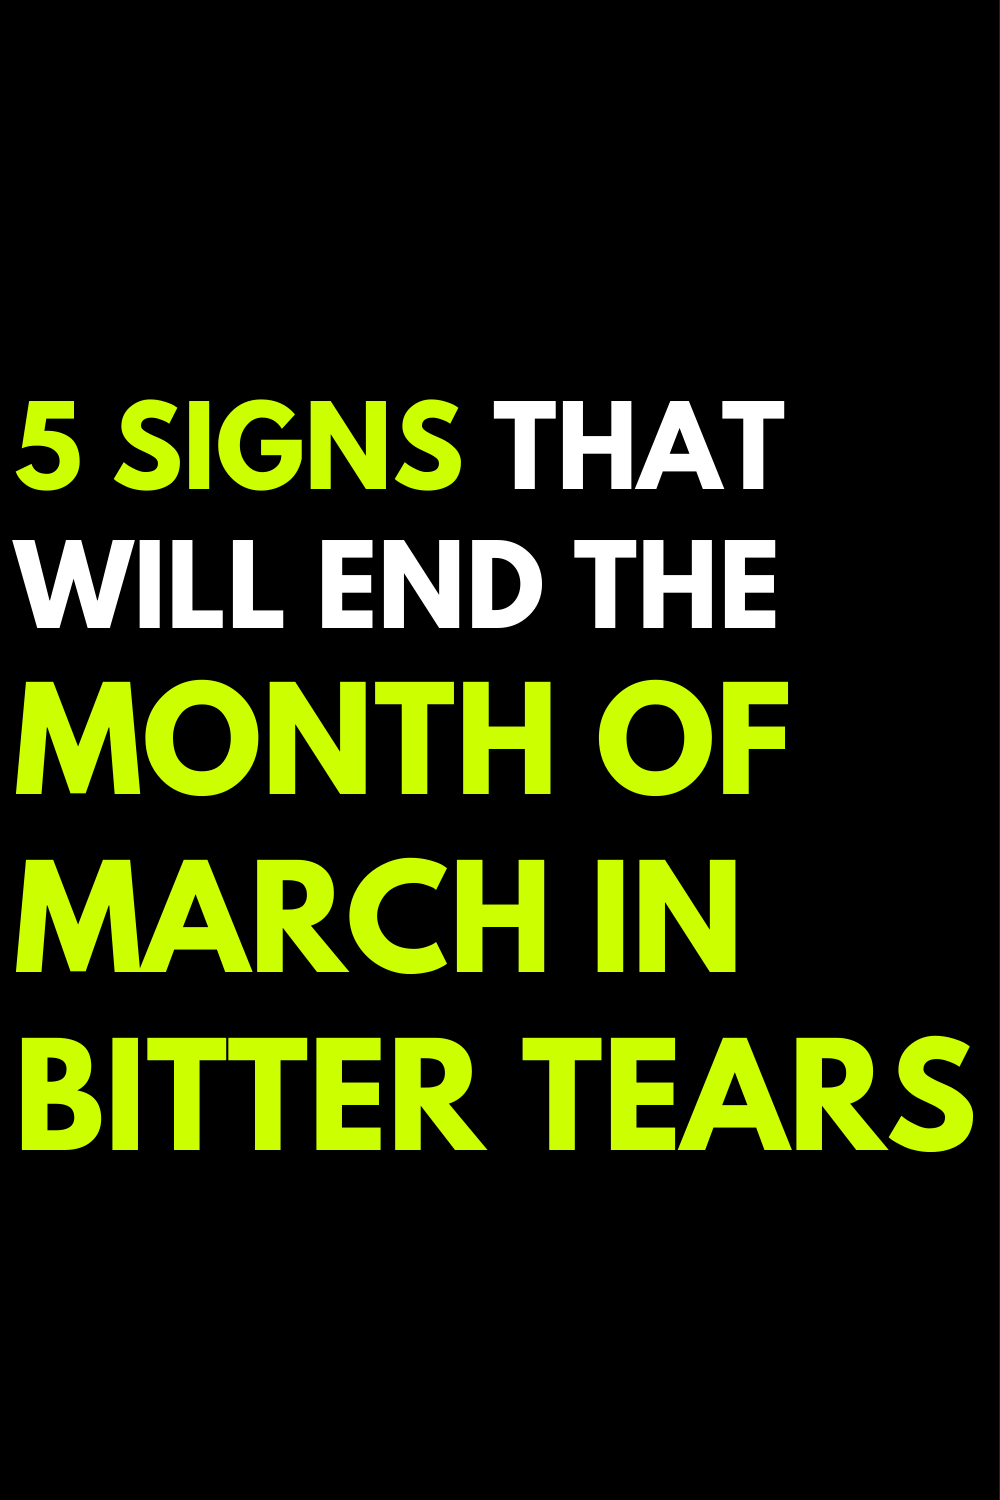 5 signs that will end the month of March in bitter tears